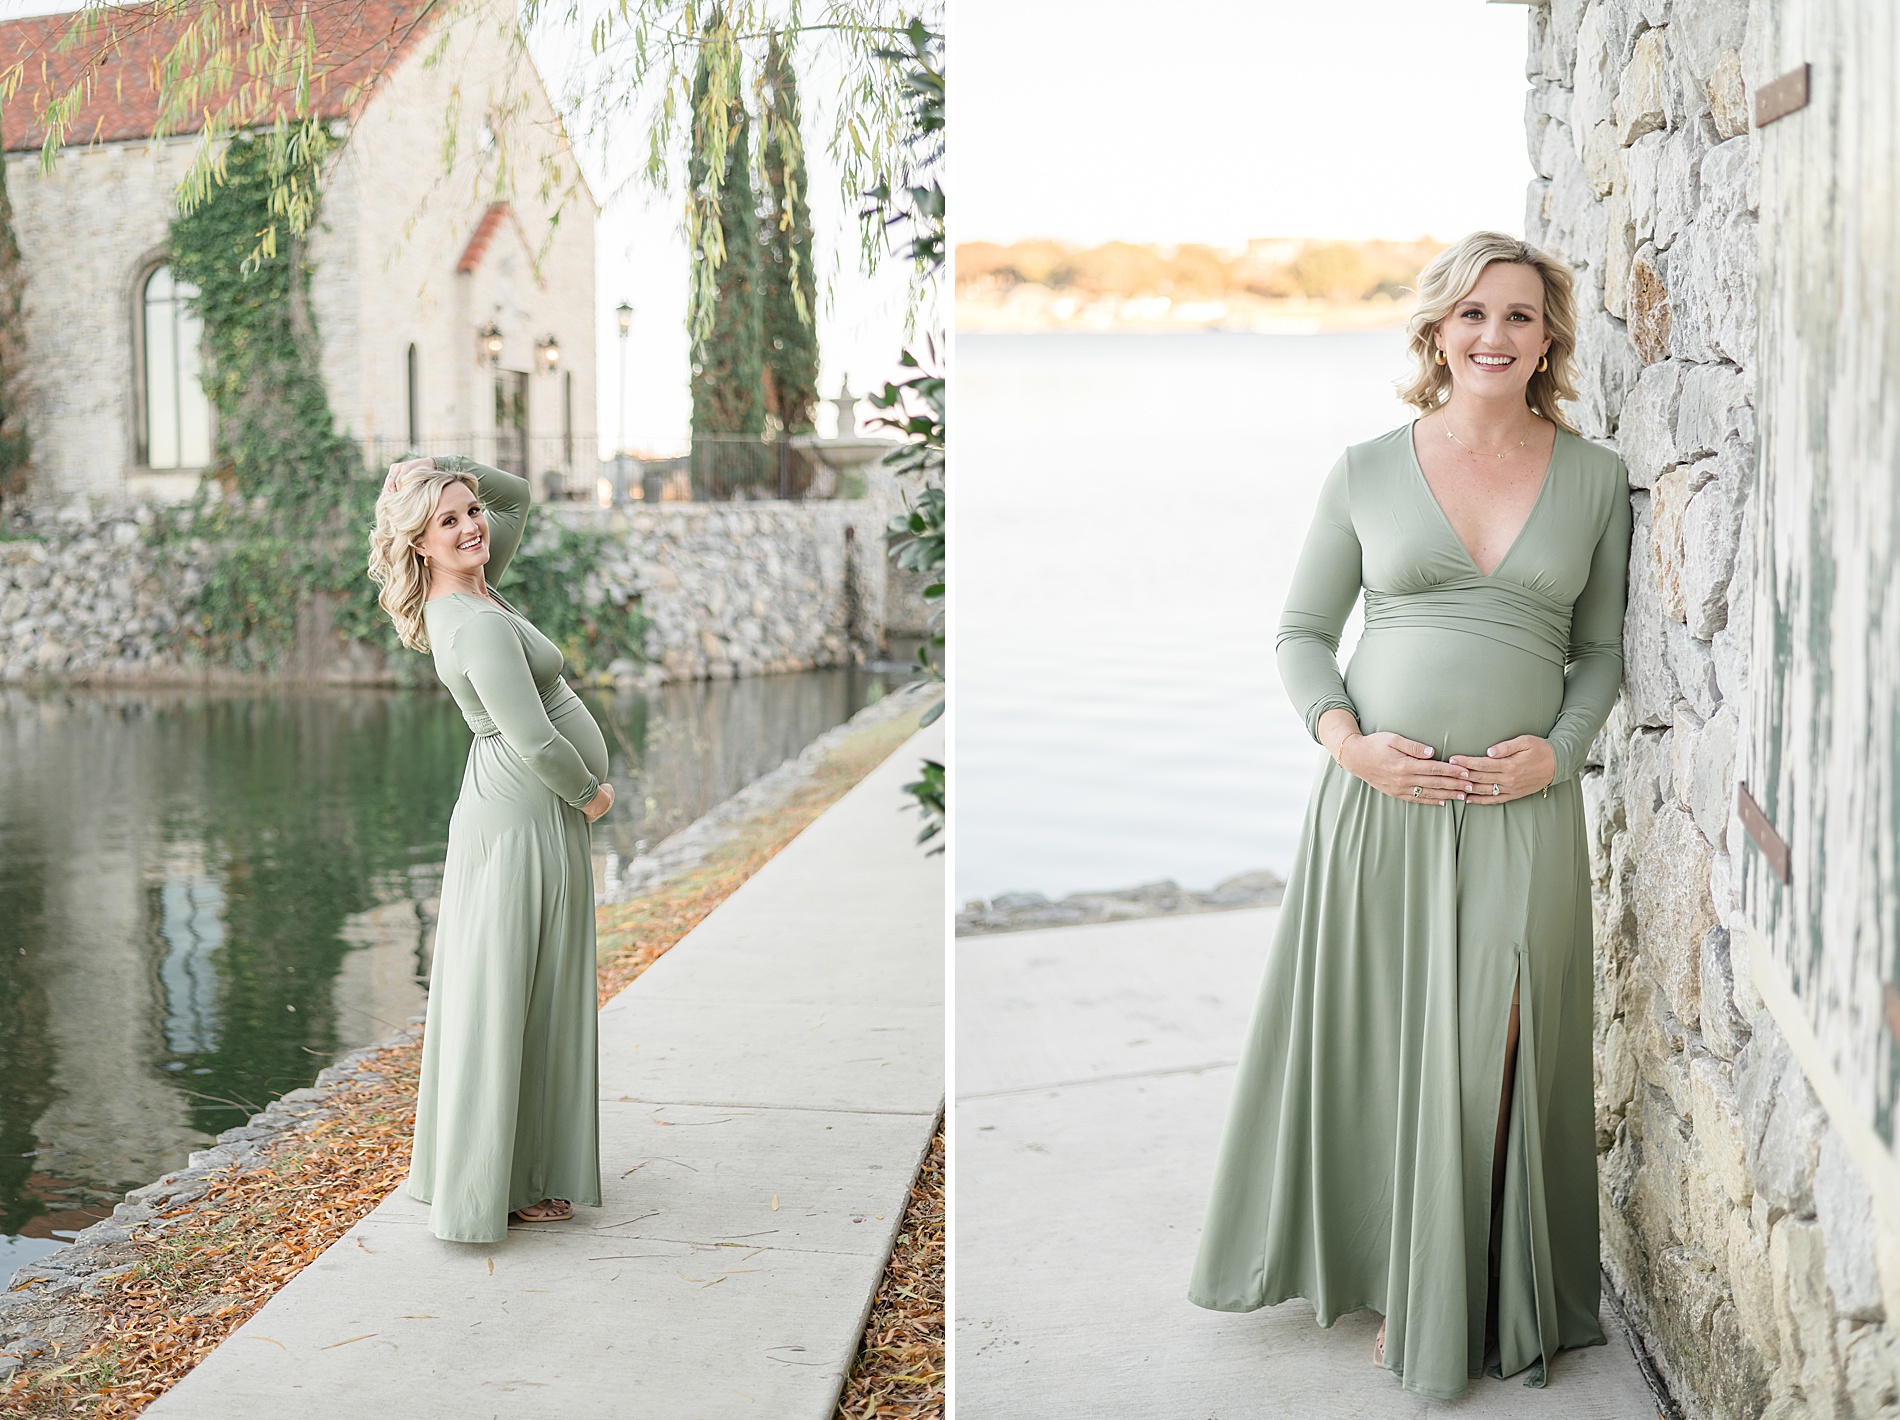 maternity portraits at Croatian Village in McKinney TX taken by Lindsey Dutton Photography, a Dallas Family photographer
